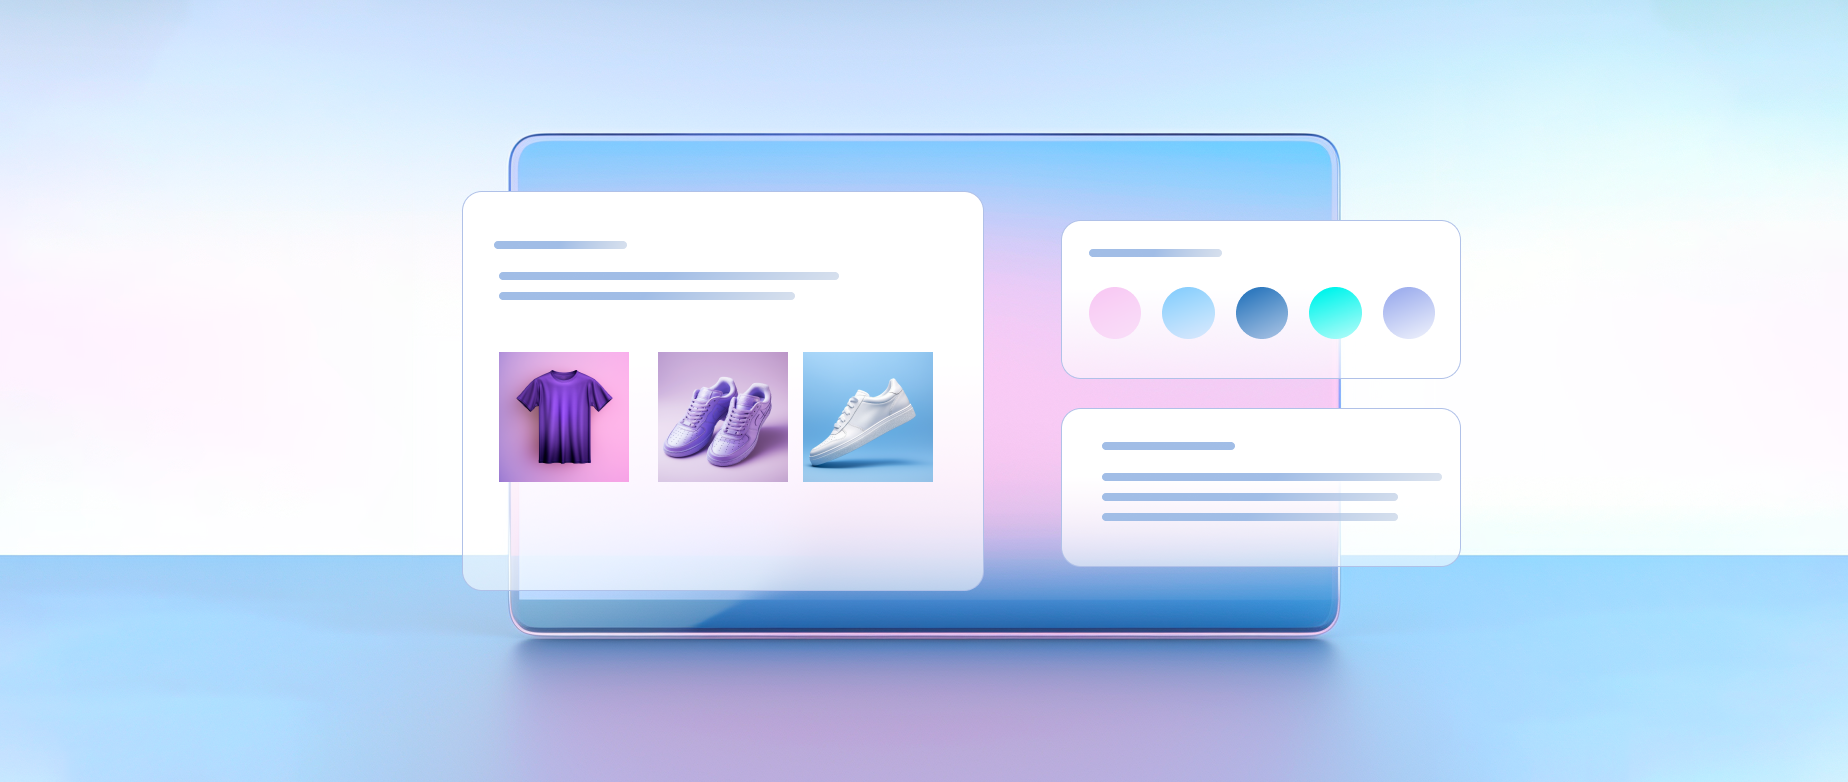 A webpage of a purple tshirt, pair of light purple shoes and a white sneaker with color options on a light blue and purple background.